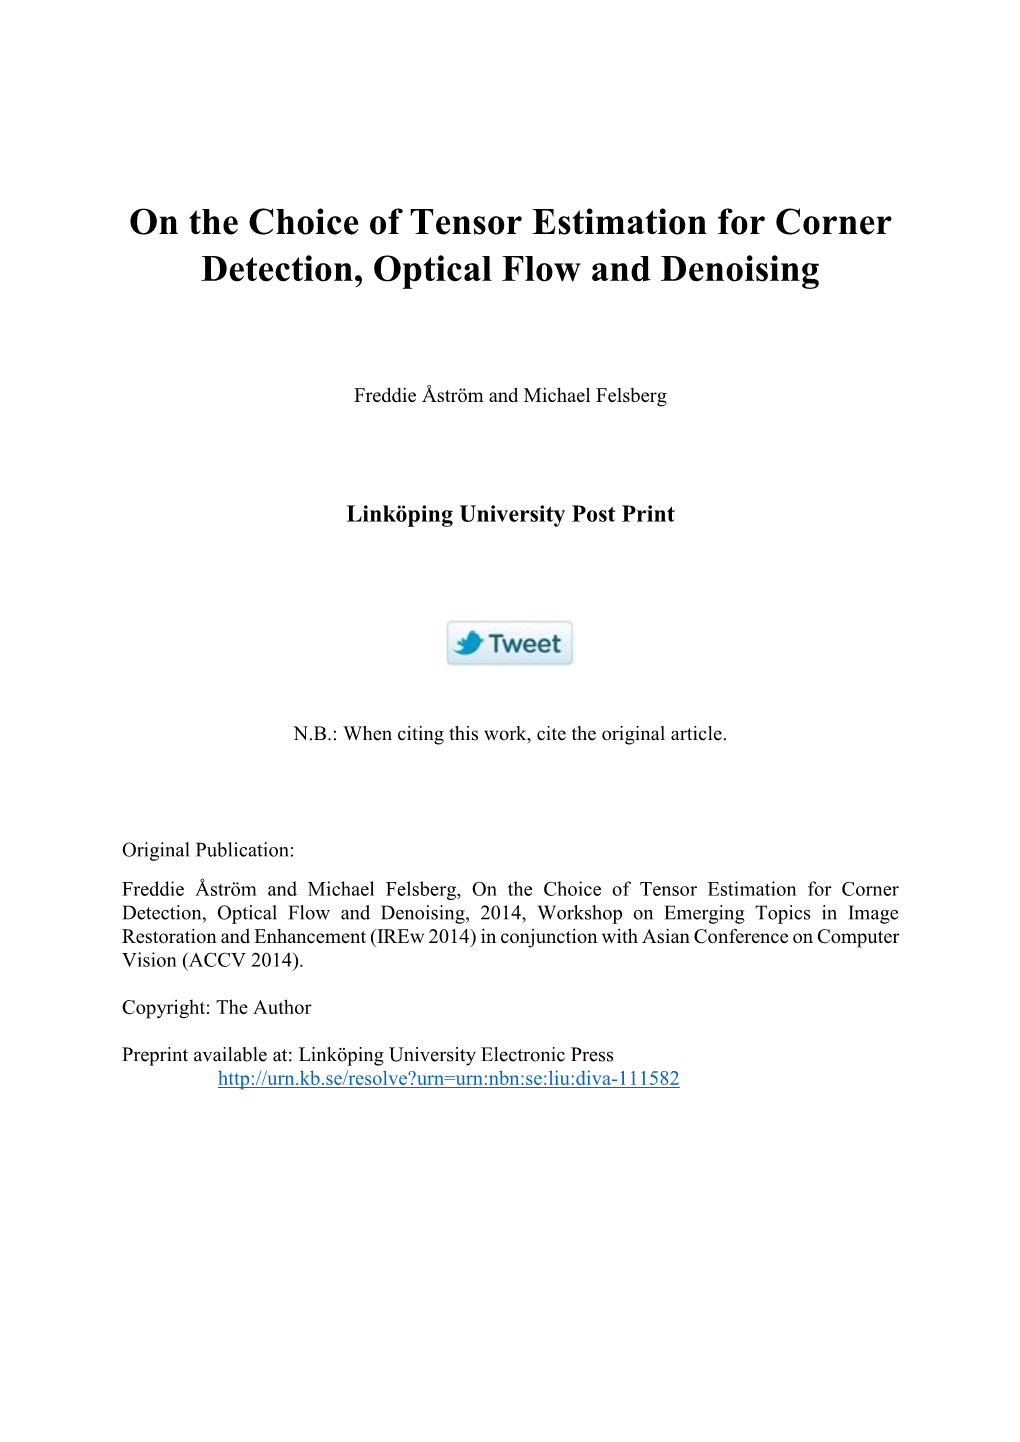 On the Choice of Tensor Estimation for Corner Detection, Optical Flow and Denoising